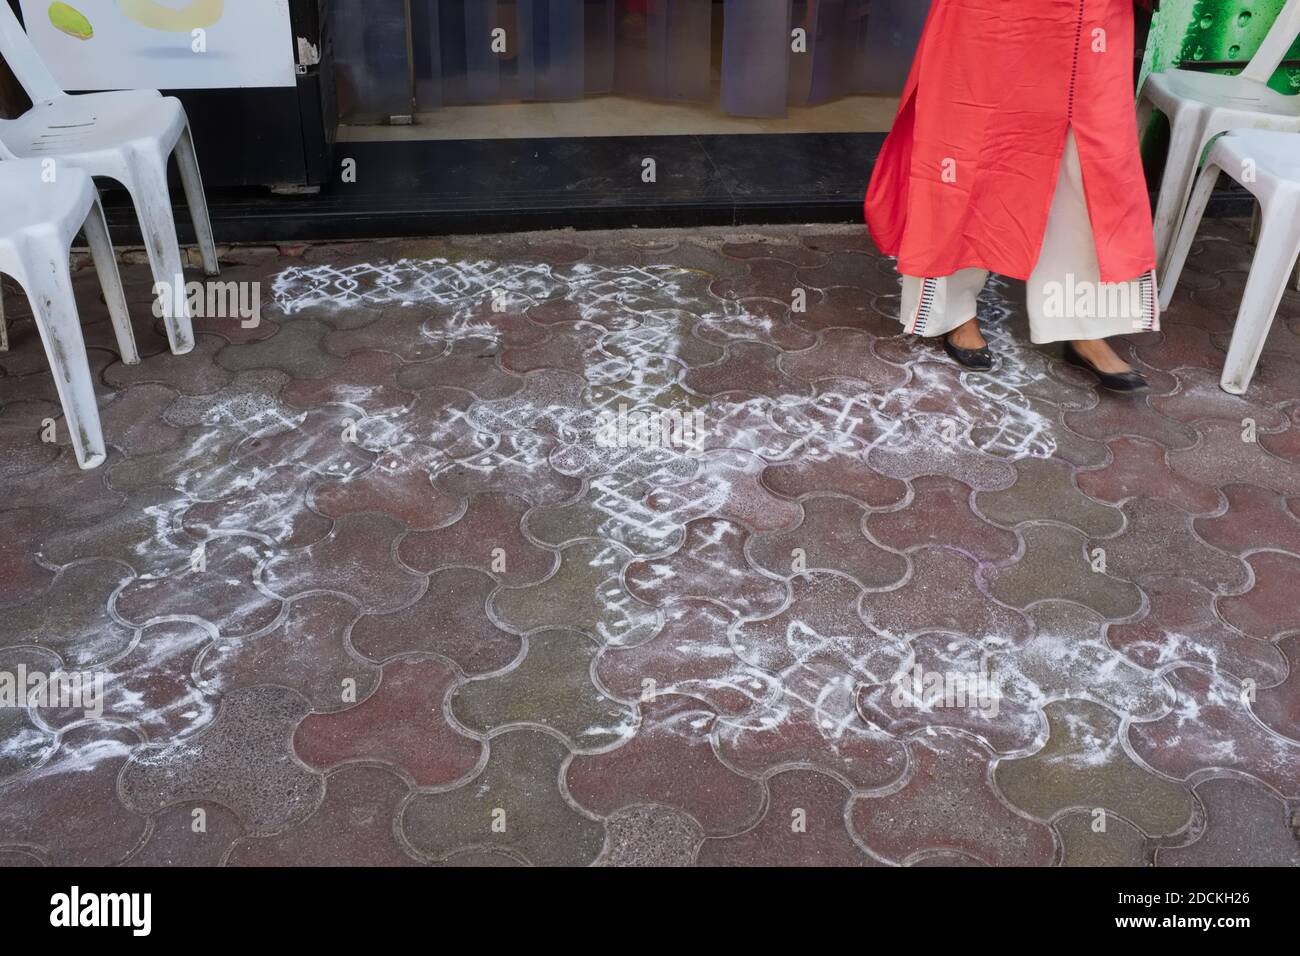 A swastika, a Hindu symbol for good fortune or blessing drawn in chalk in front of a restaurant in Mumbai, India Stock Photo